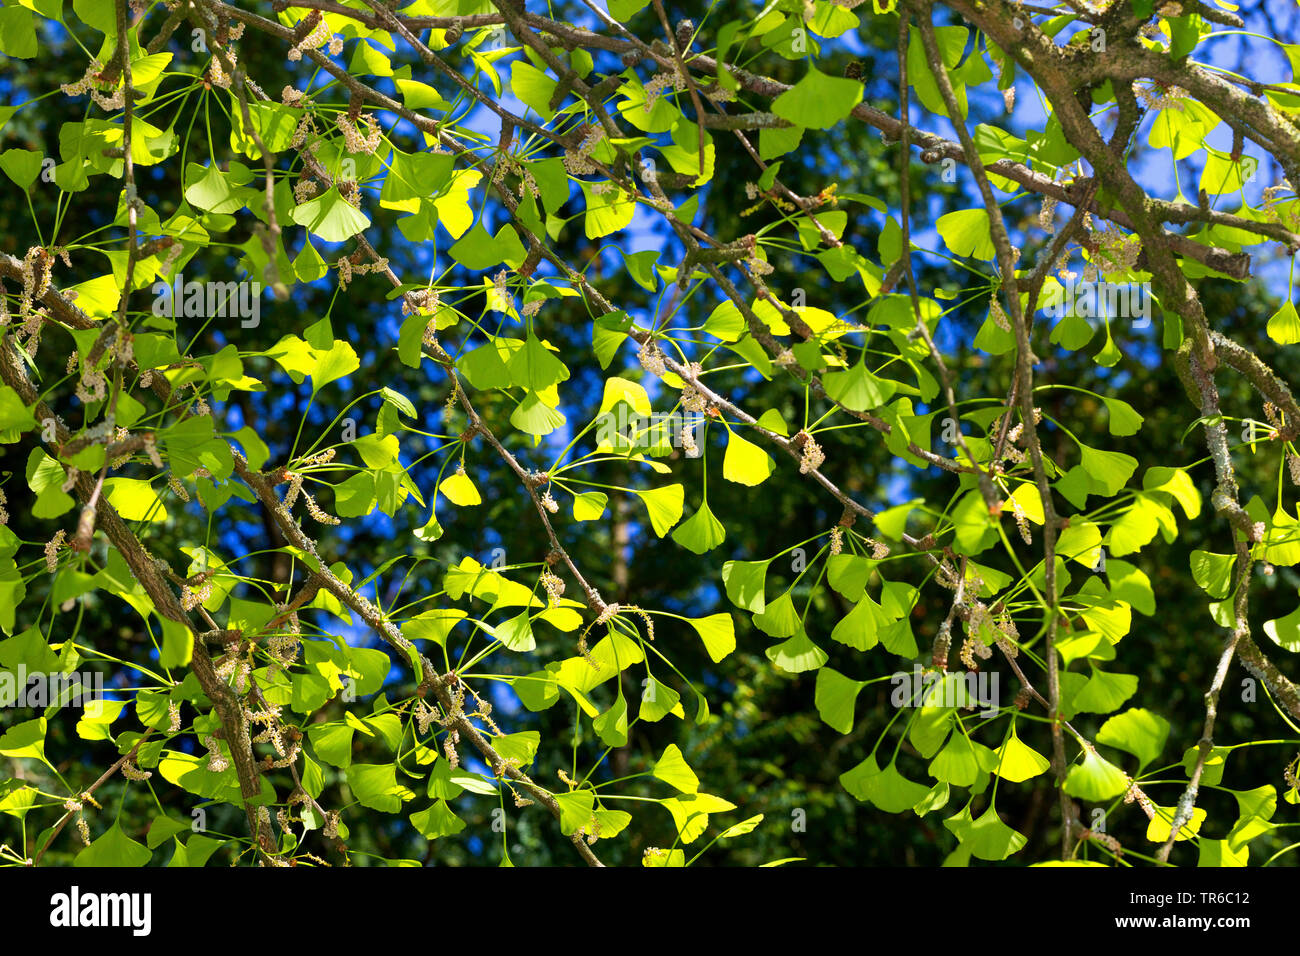 maidenhair tree, Ginkgo Tree, Gingko Tree, Ginko Tree (Ginkgo biloba), branch with young leaves and male flowers Stock Photo